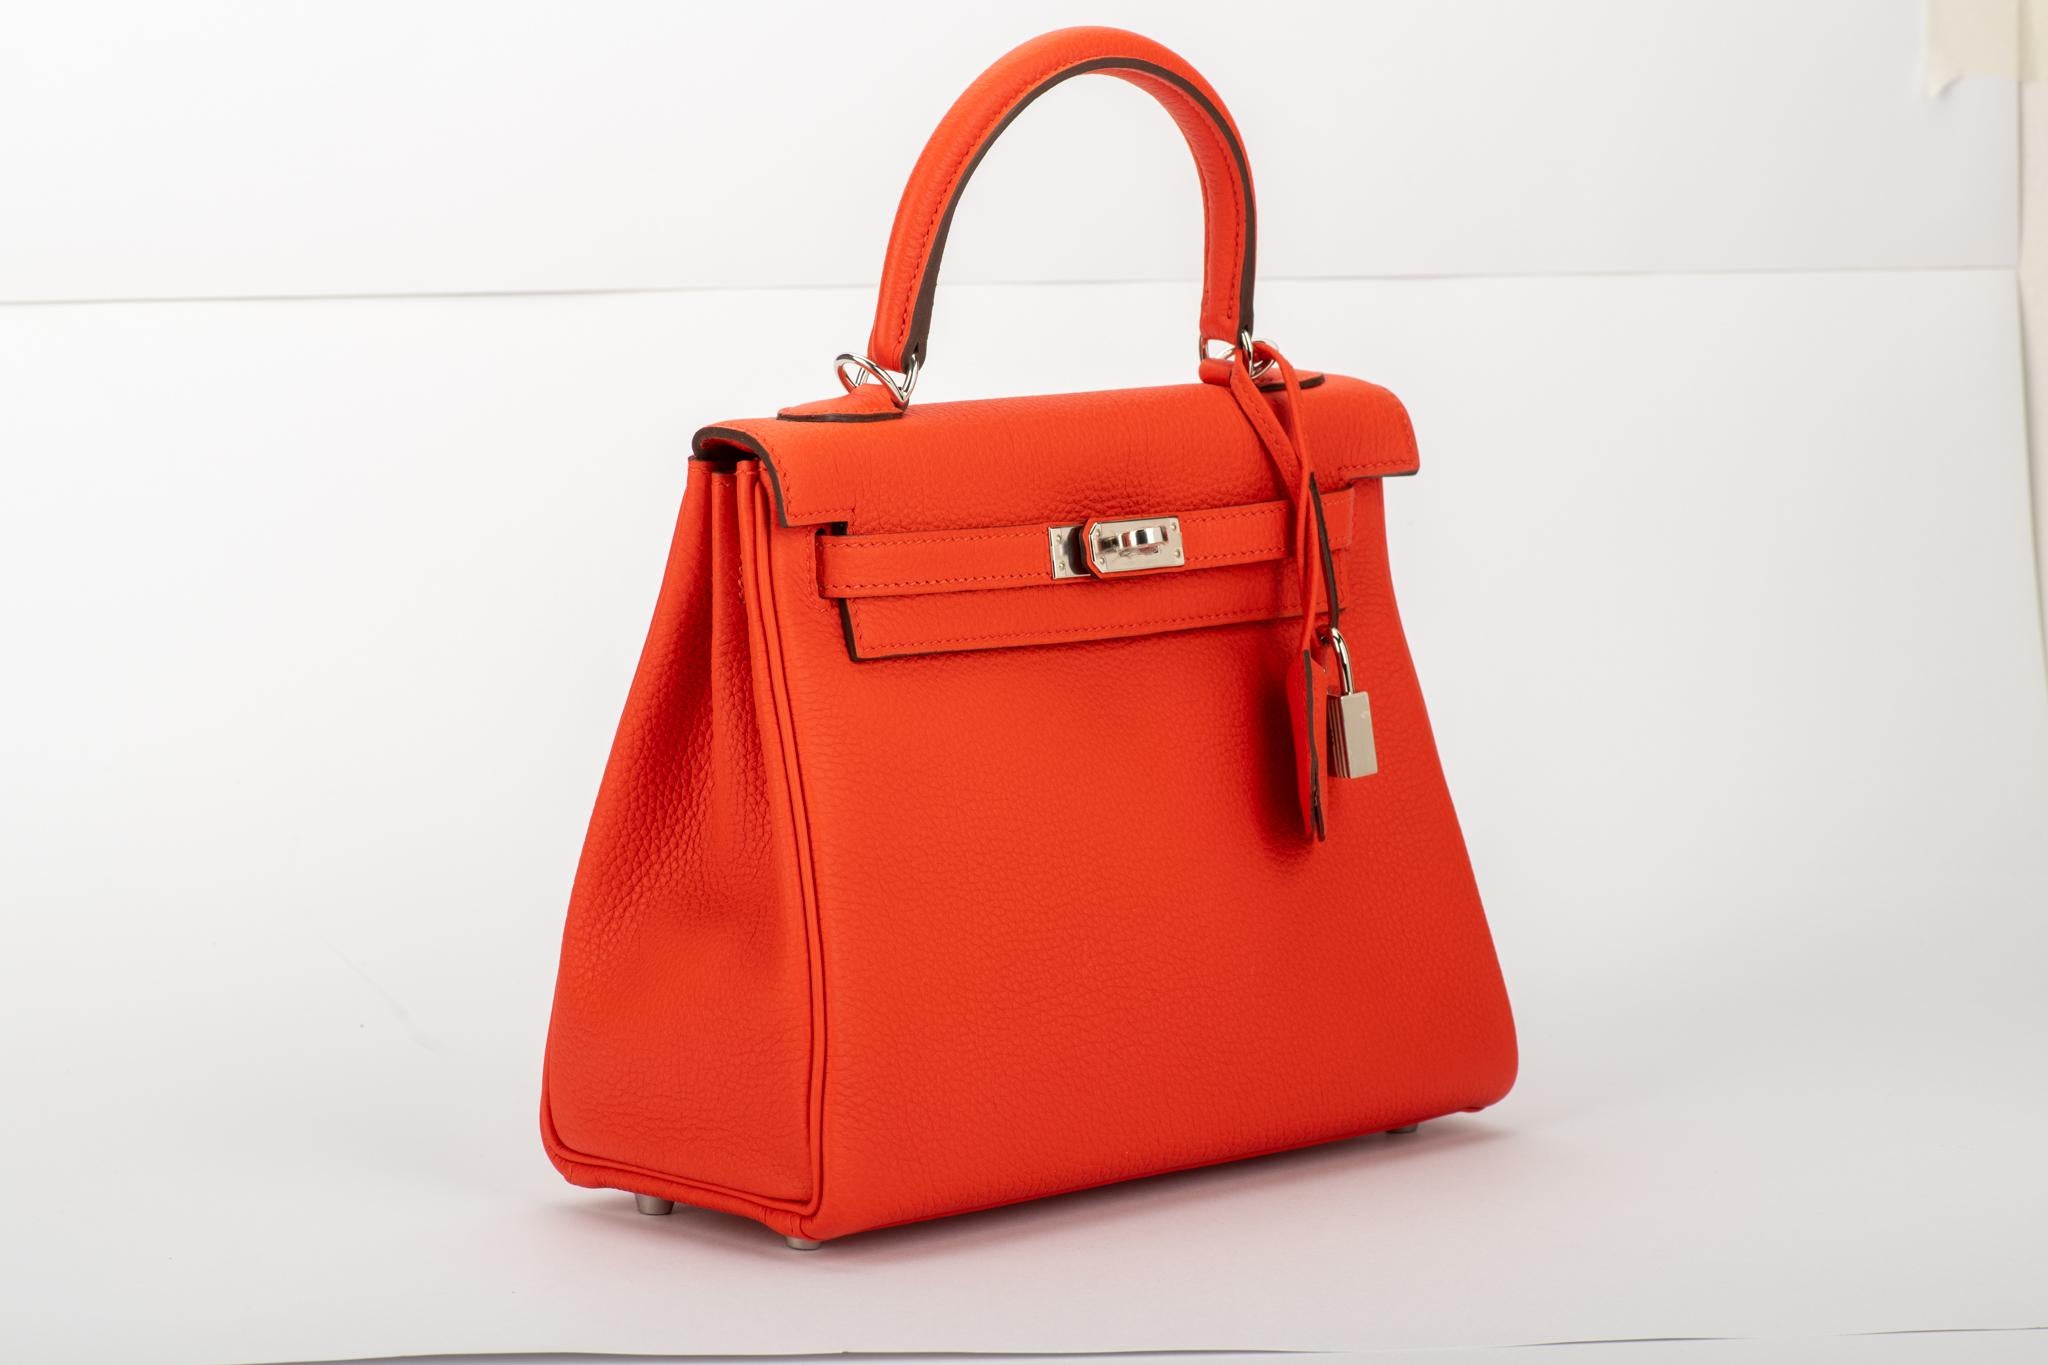 Red New in Box 2018 Hermes Rare Kelly 25 Capucine Togo Bag